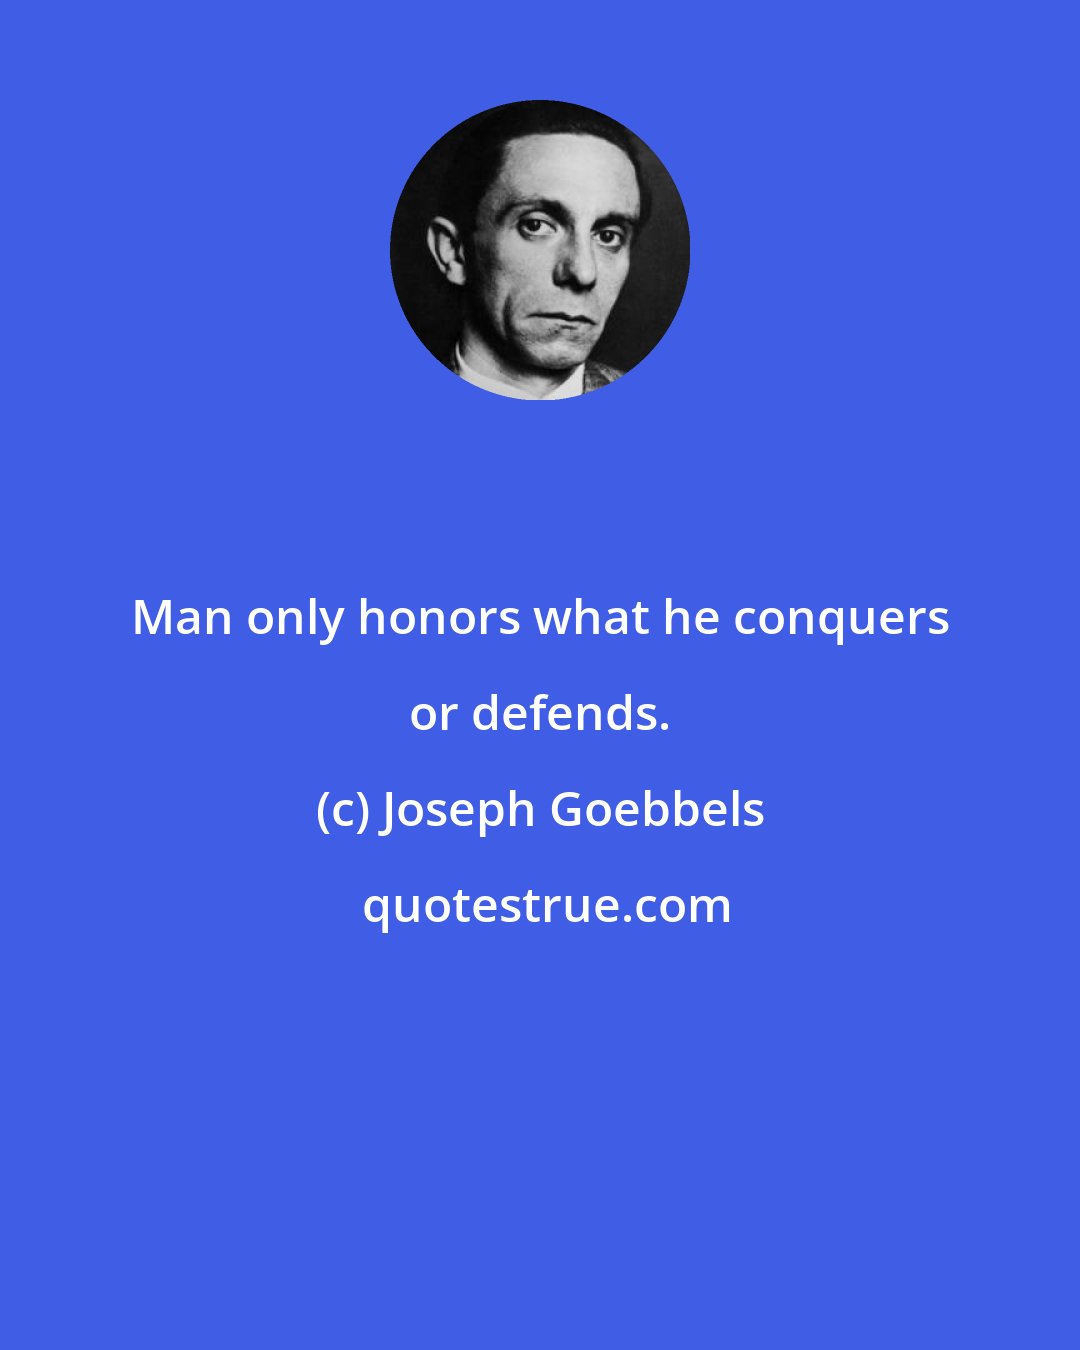 Joseph Goebbels: Man only honors what he conquers or defends.